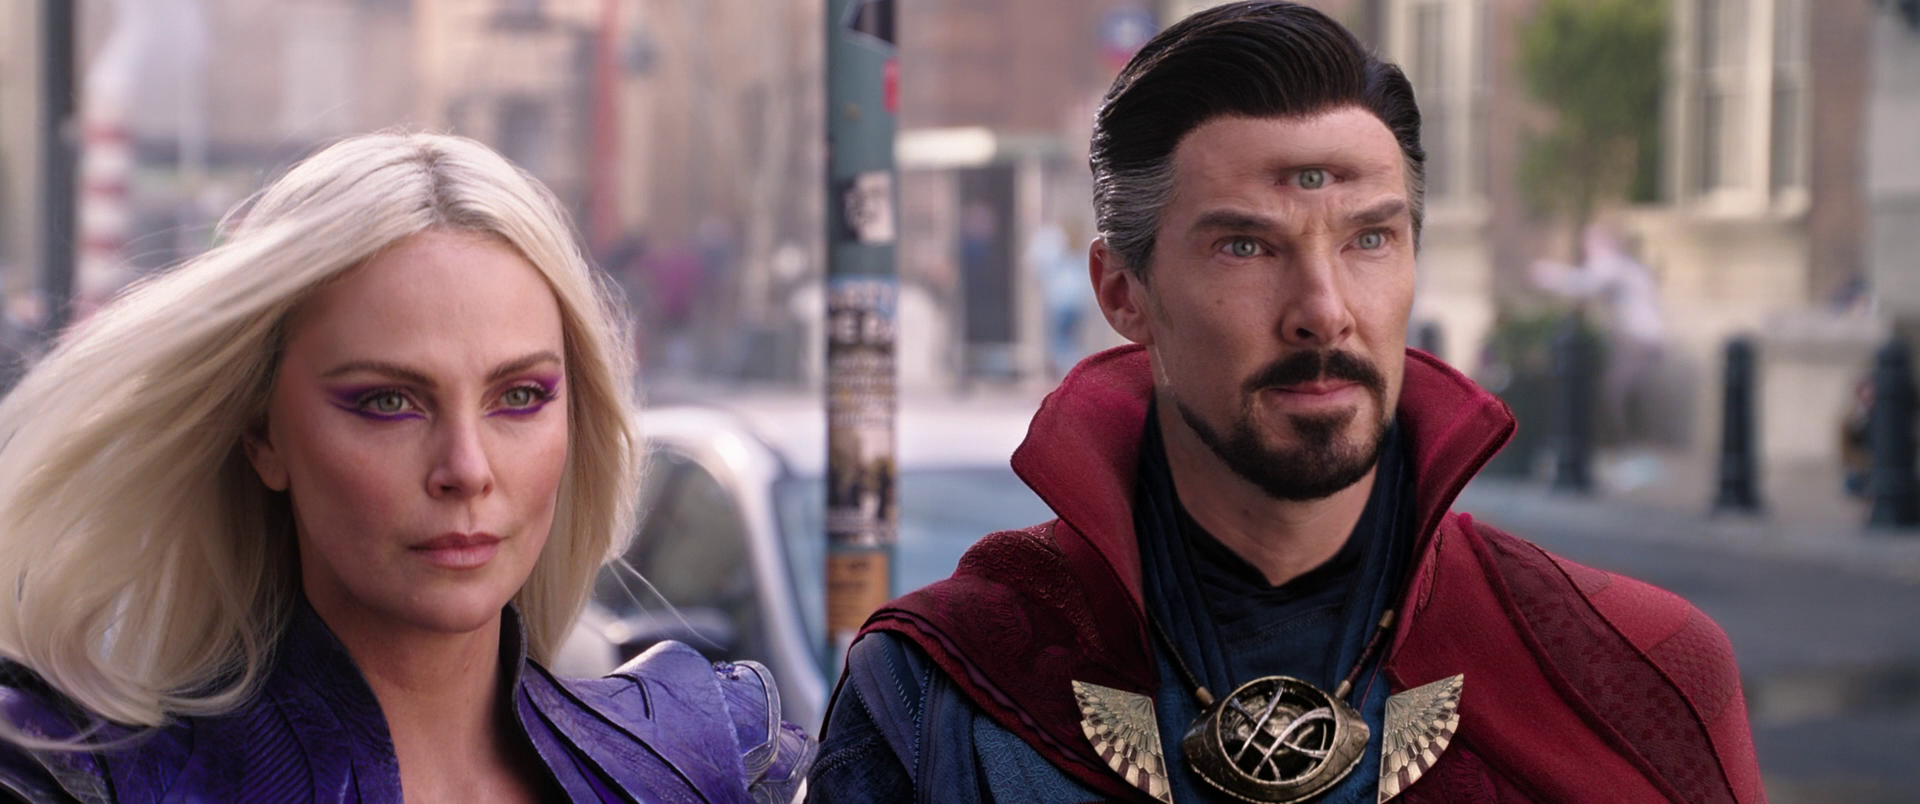 Clea (Charlize Theron) and Doctor Strange (Benedict Cumberbatch) prepare to enter the Dark Dimension in Doctor Strange in the Multiverse of Madness (2022), Marvel Entertainment